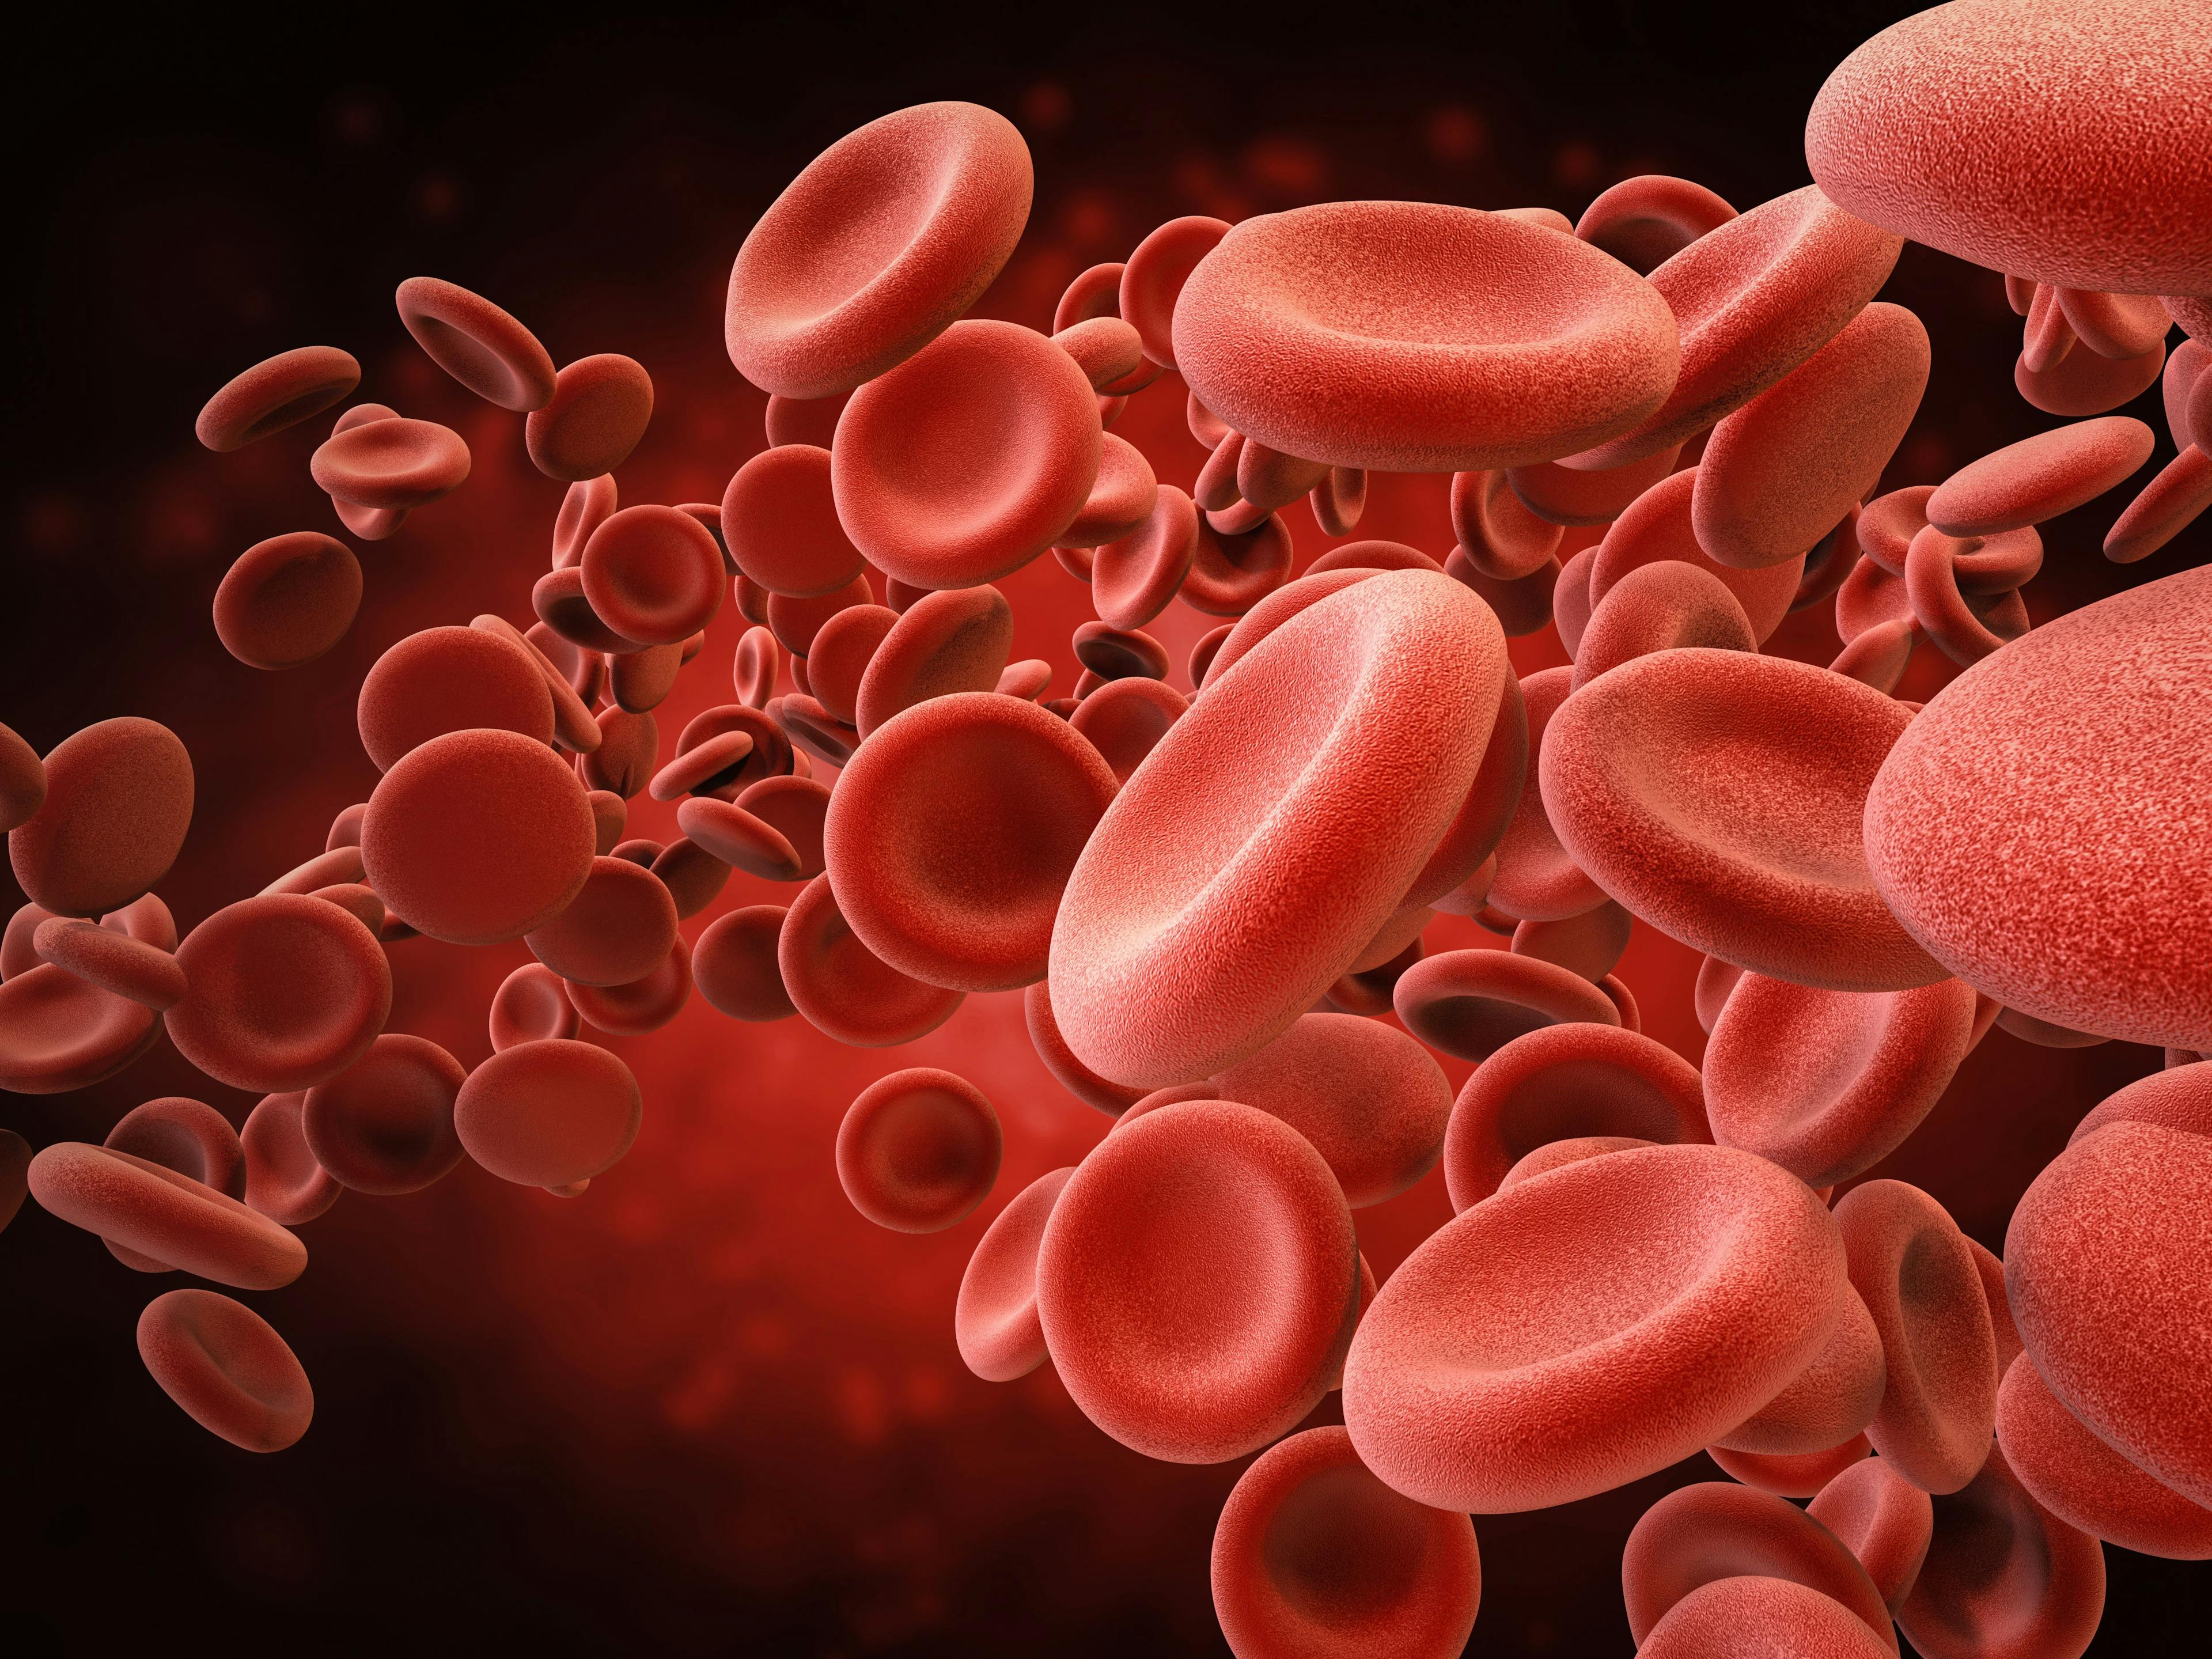 Digital illustration of blood cells within an artery.